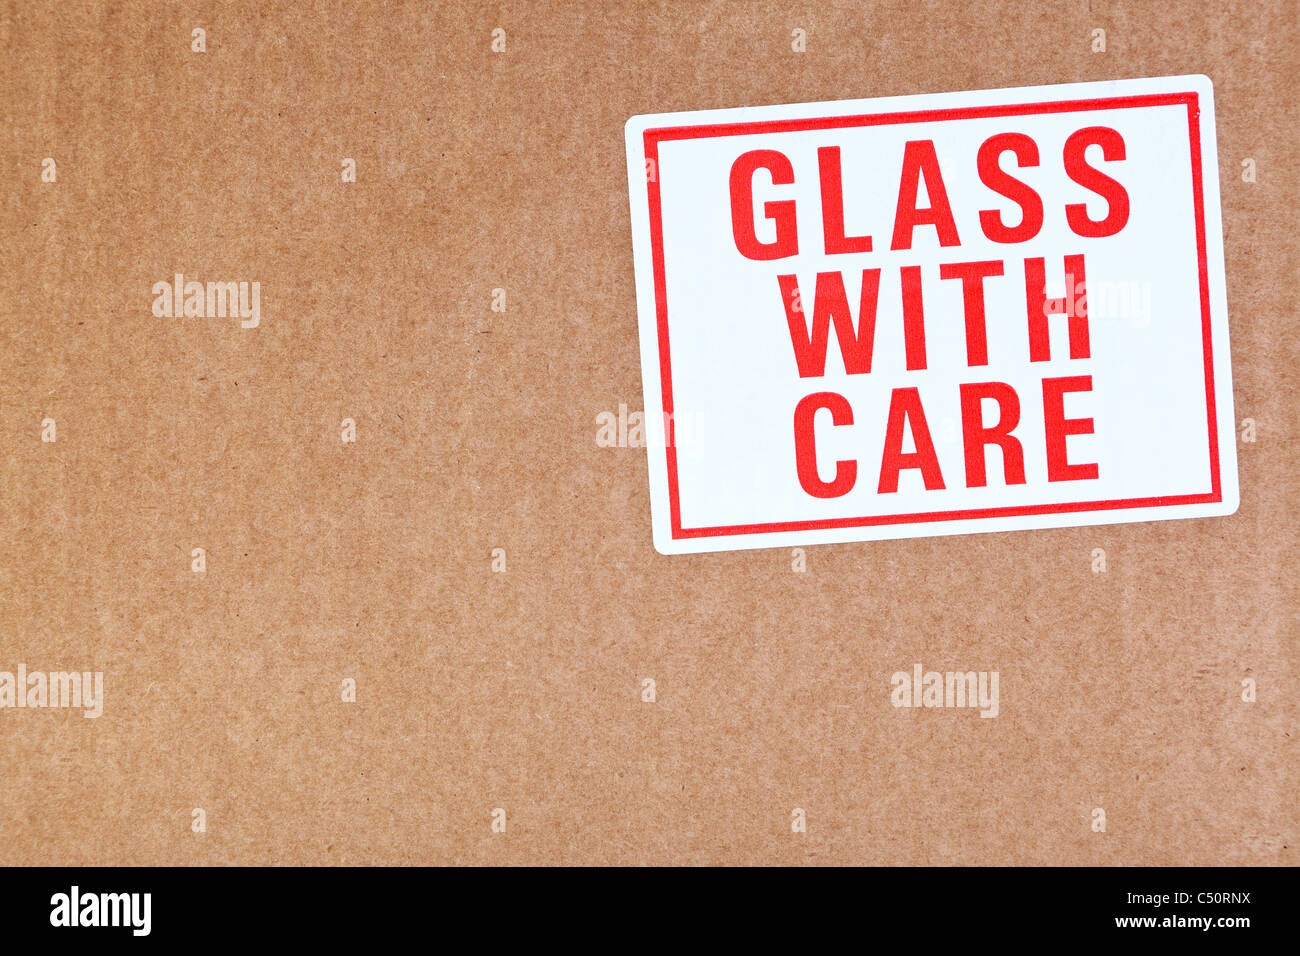 Photo of a Glass with care sticker on a cardboard background. Stock Photo